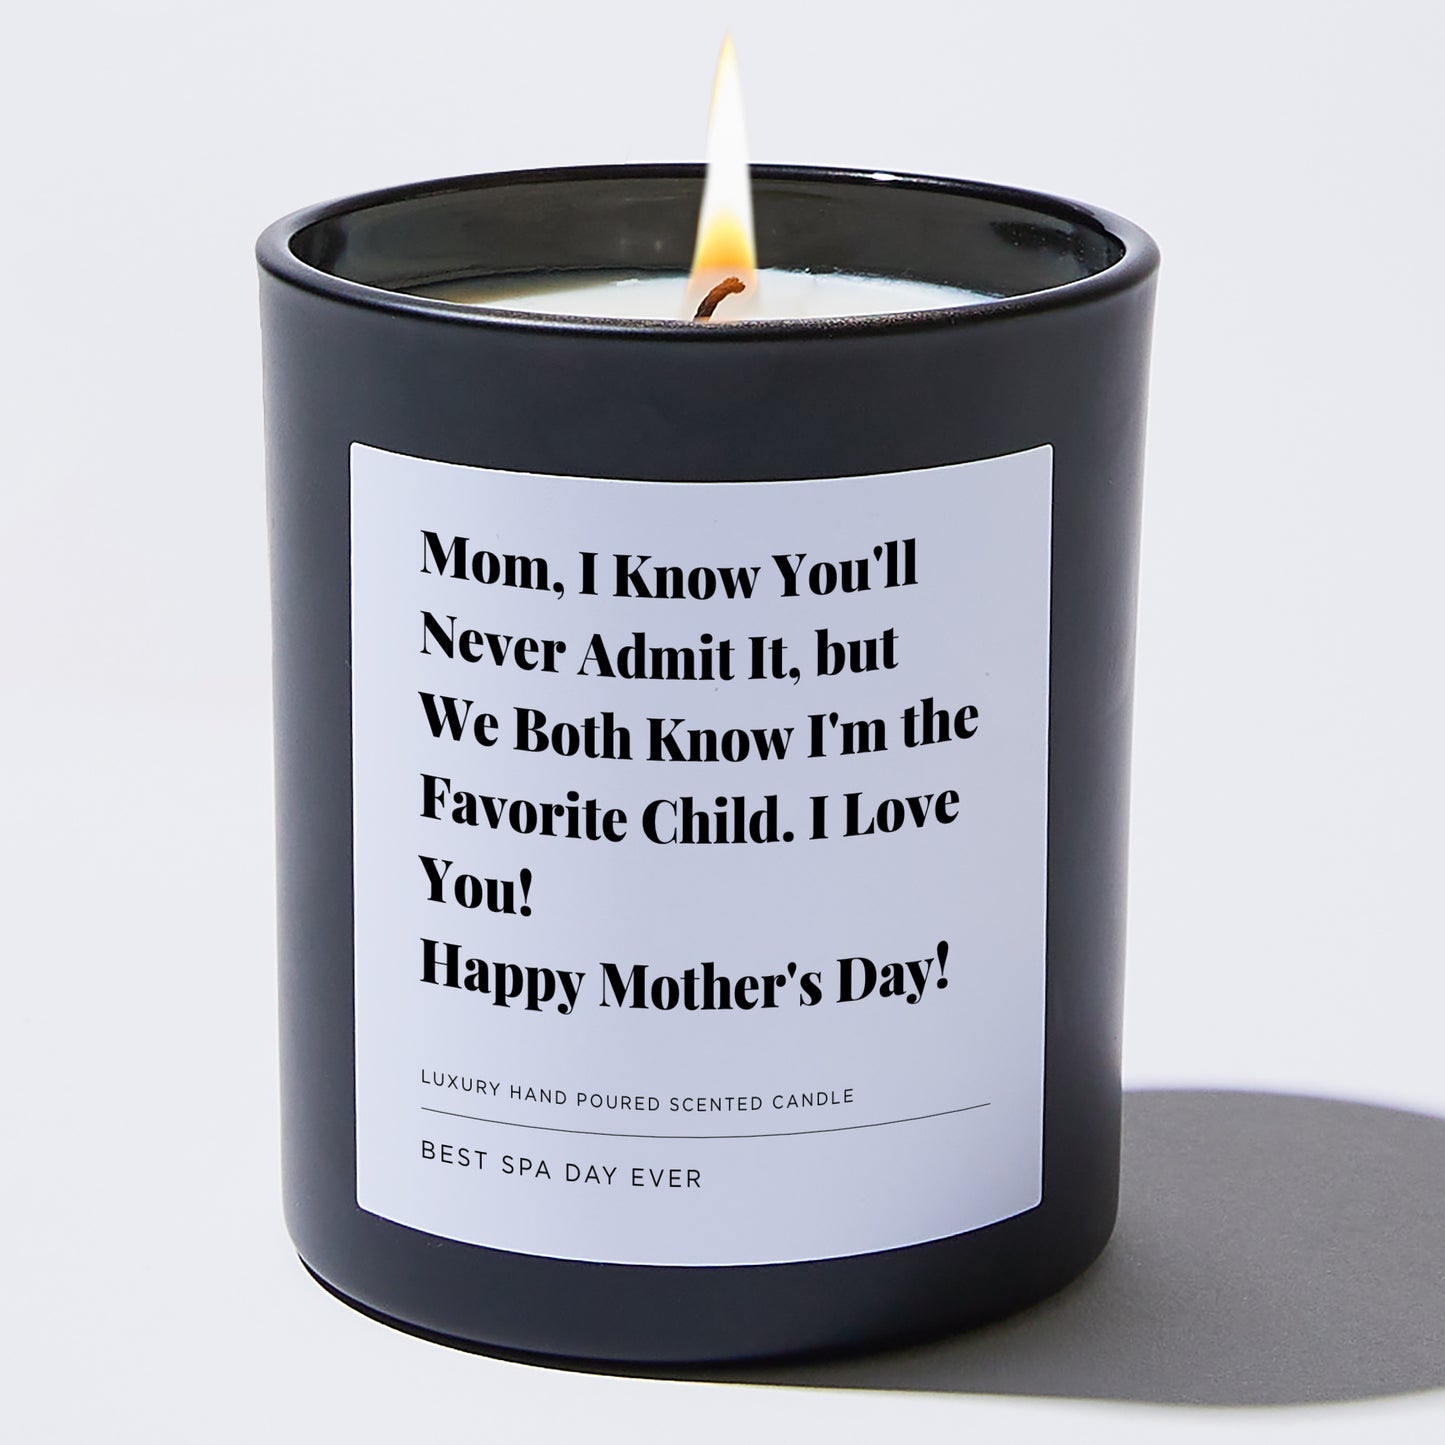 Gift for Mom - Mom, I know you'll never admit it, but we both know I'm the favorite child. I Love You! Happy Mother's Day! - Candle